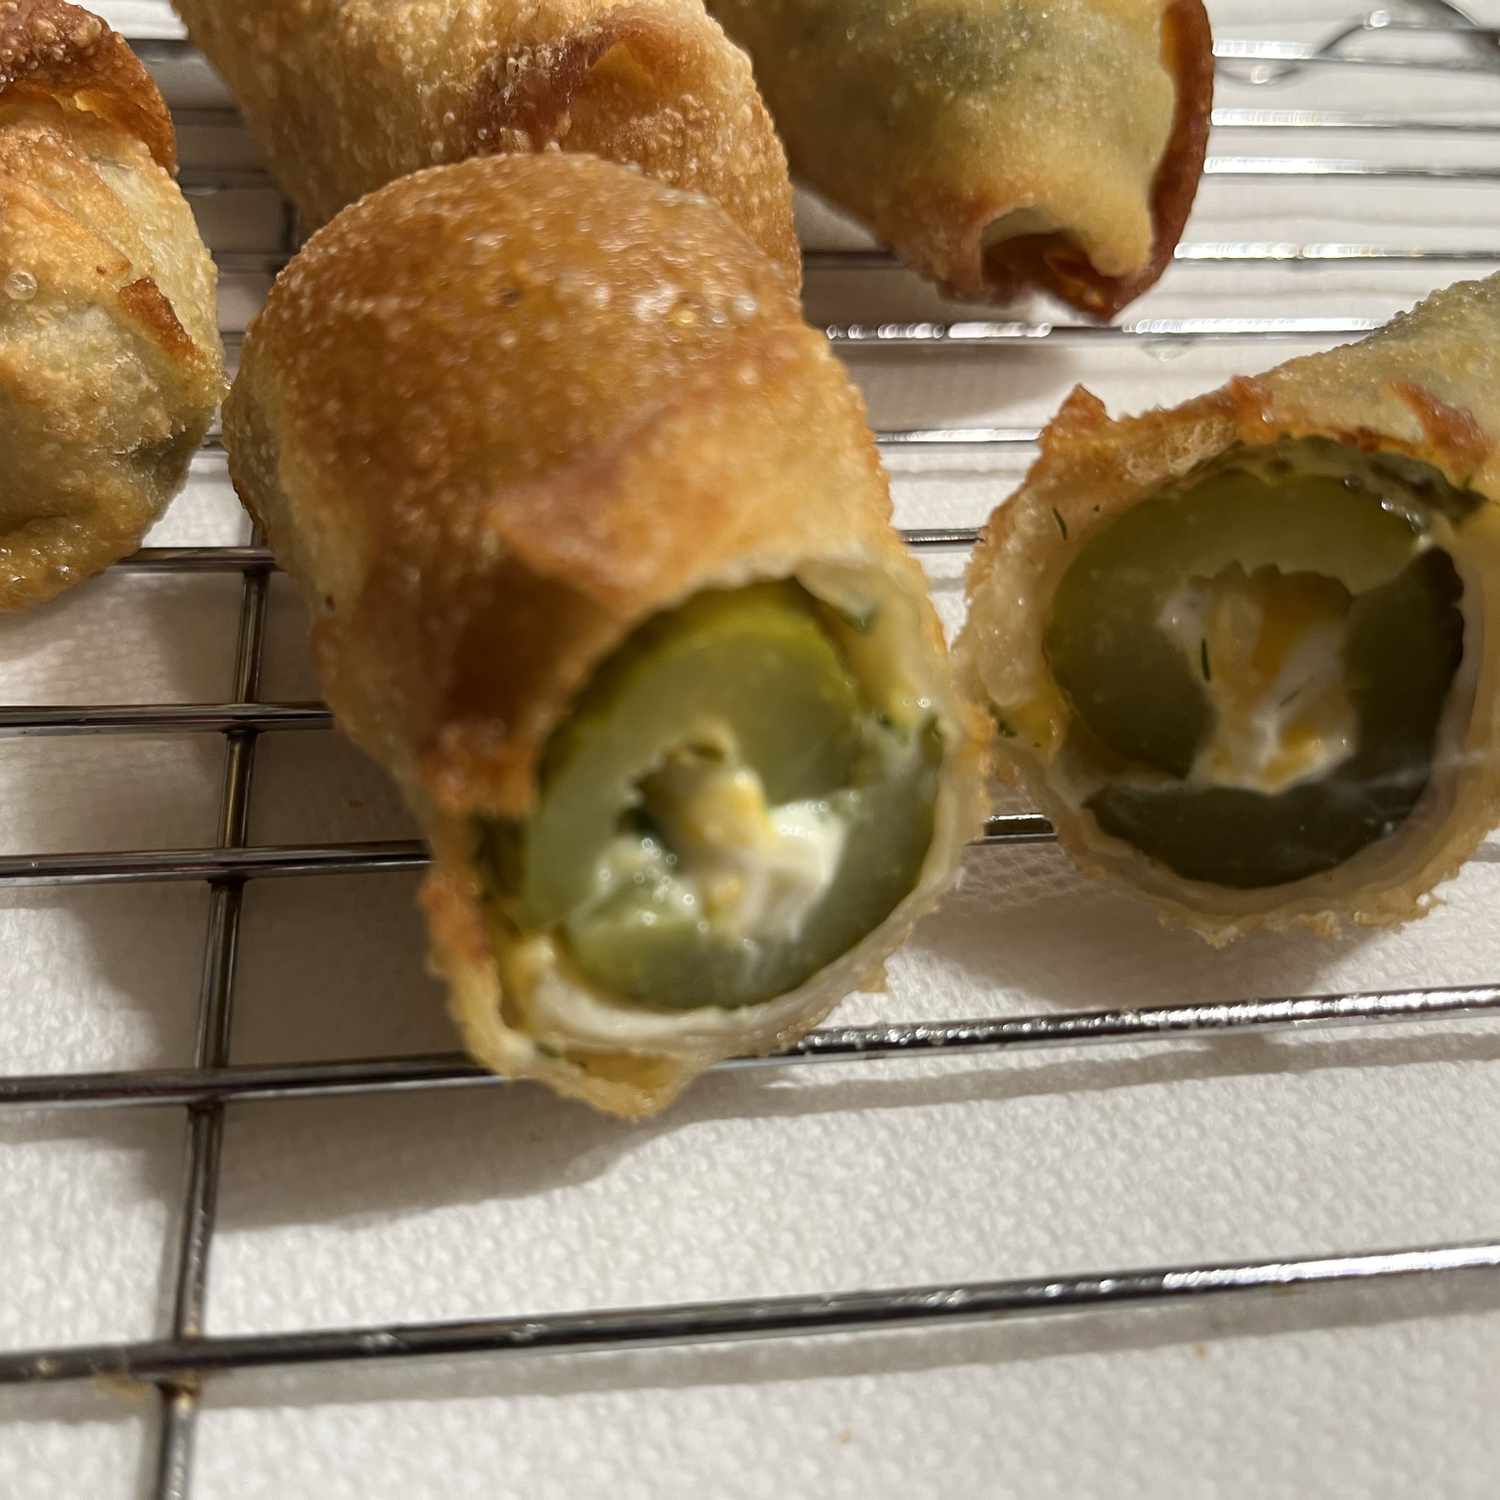 Pickles stuffed with cheese and wrapped in egg roll wrappers and fried